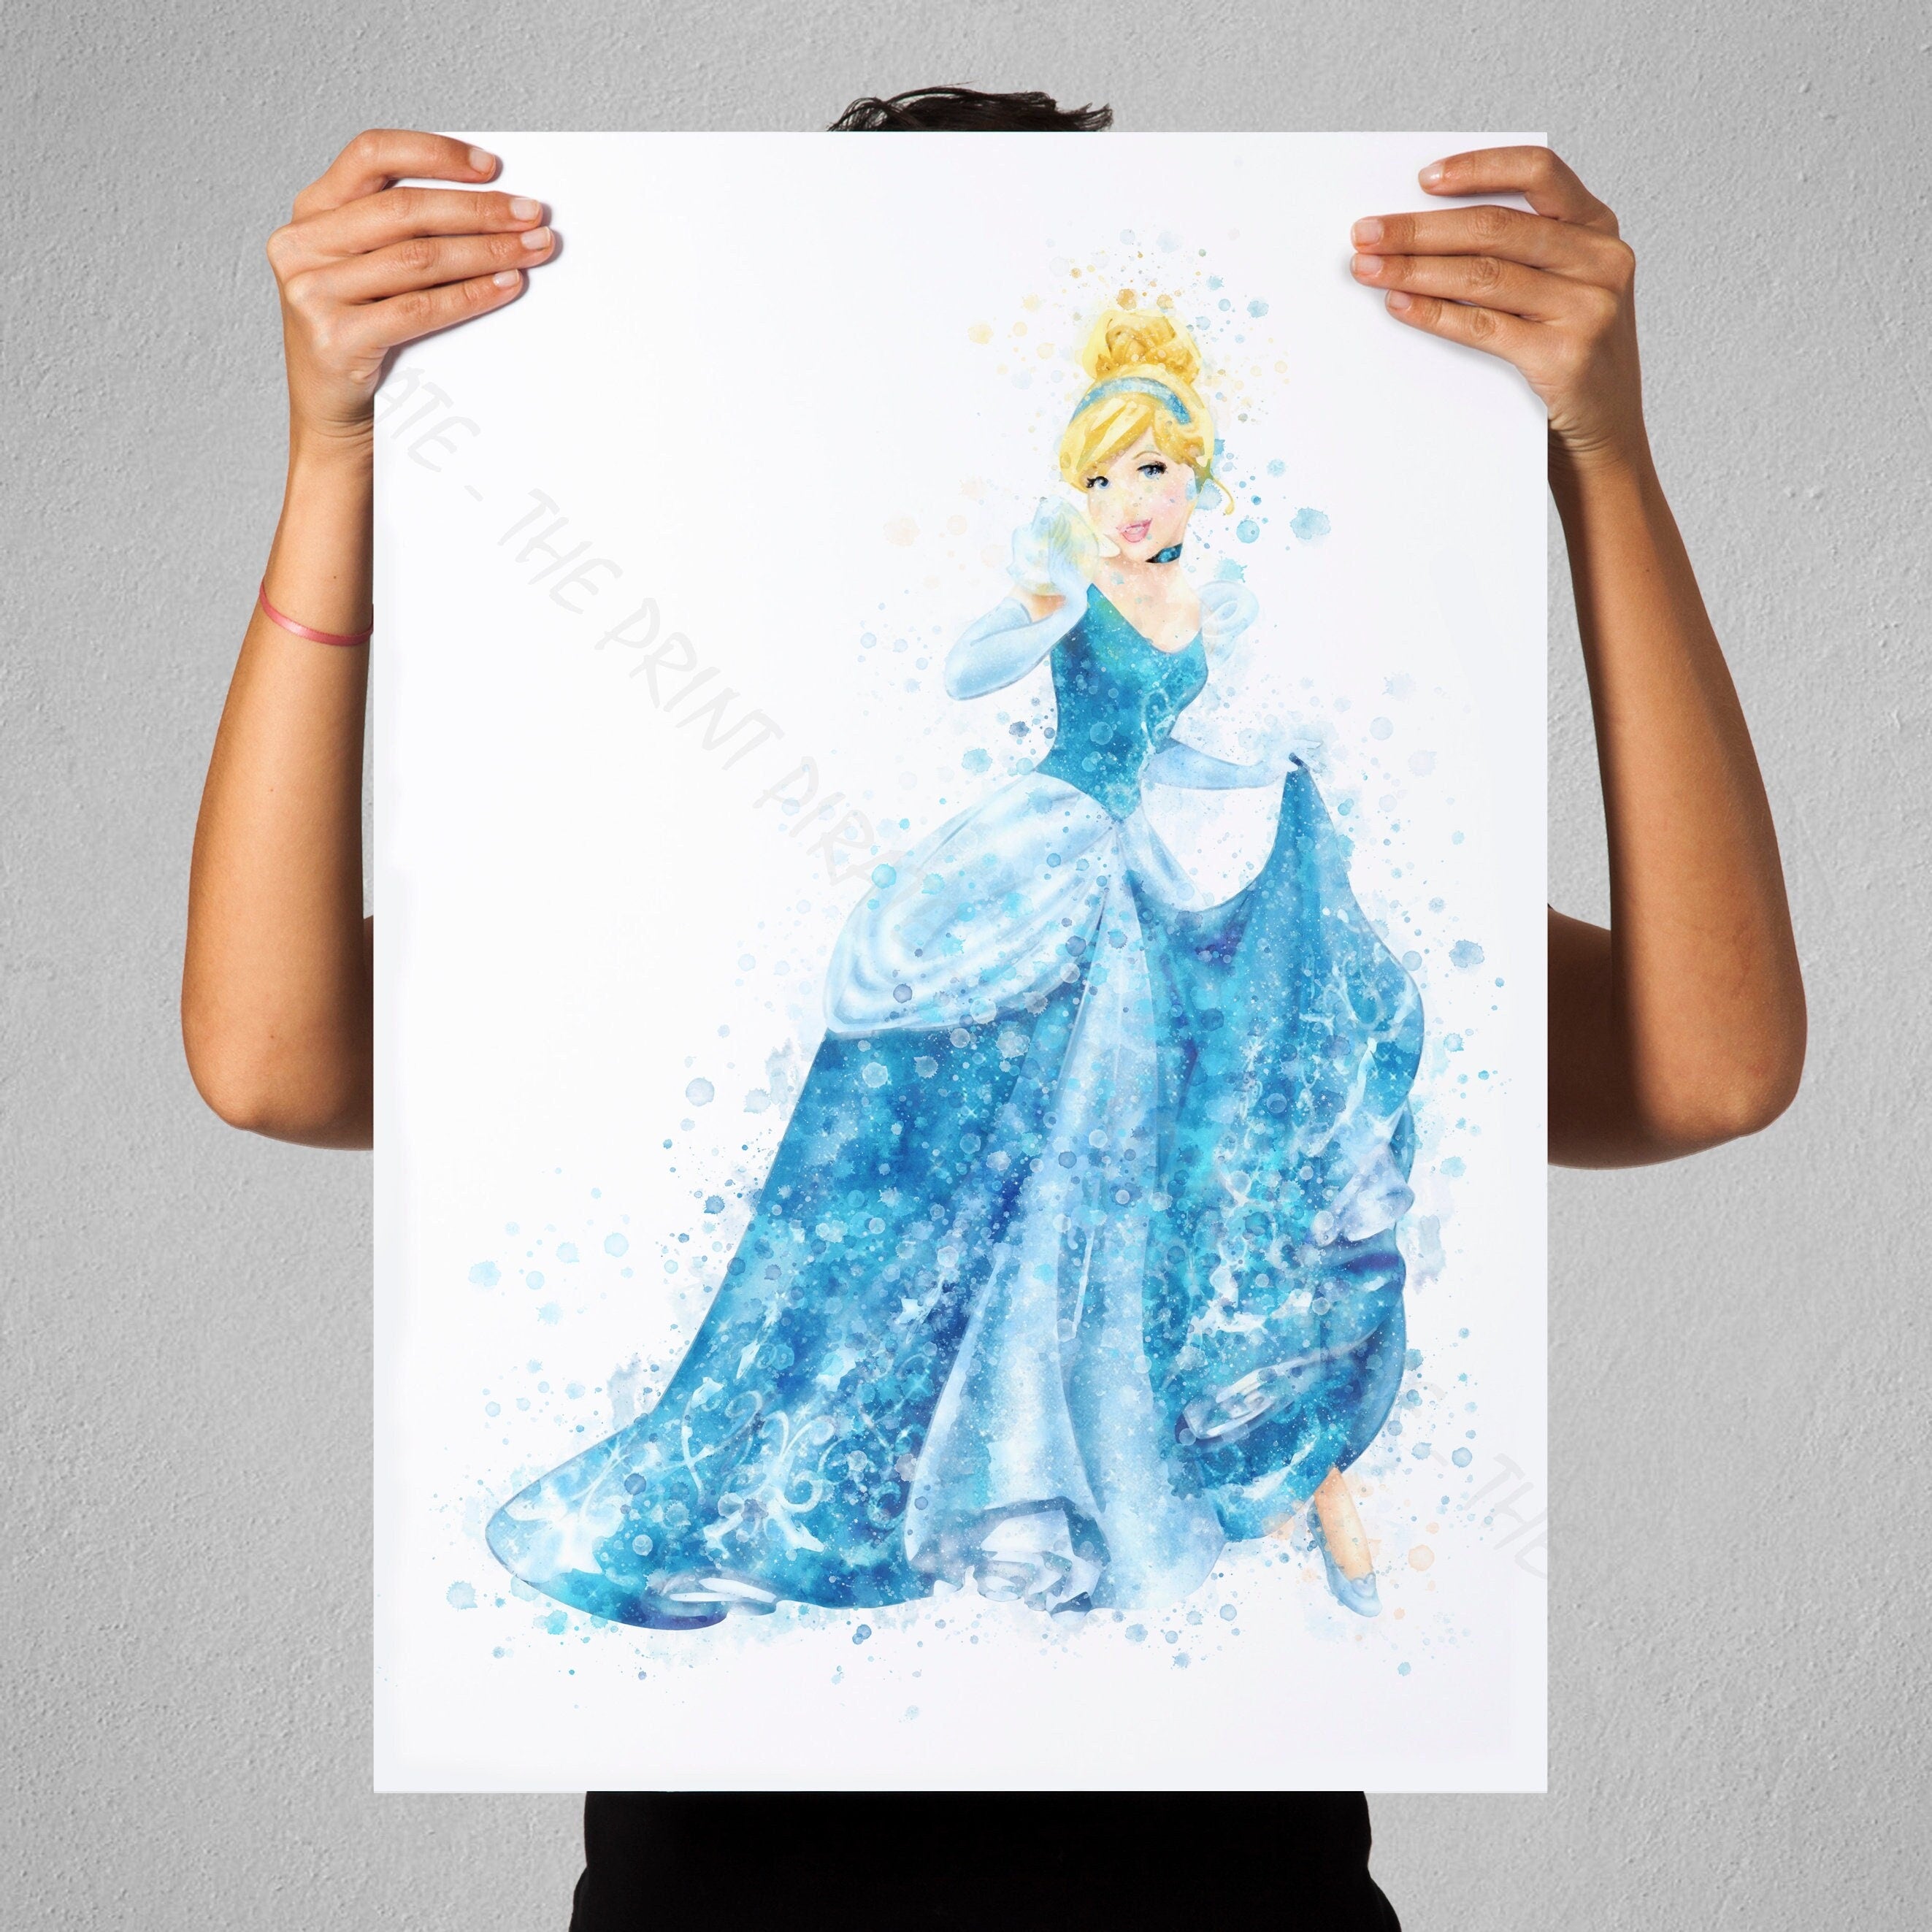 How to Draw Cinderella || Easy Step by Step || Disney Princess Drawing -  YouTube